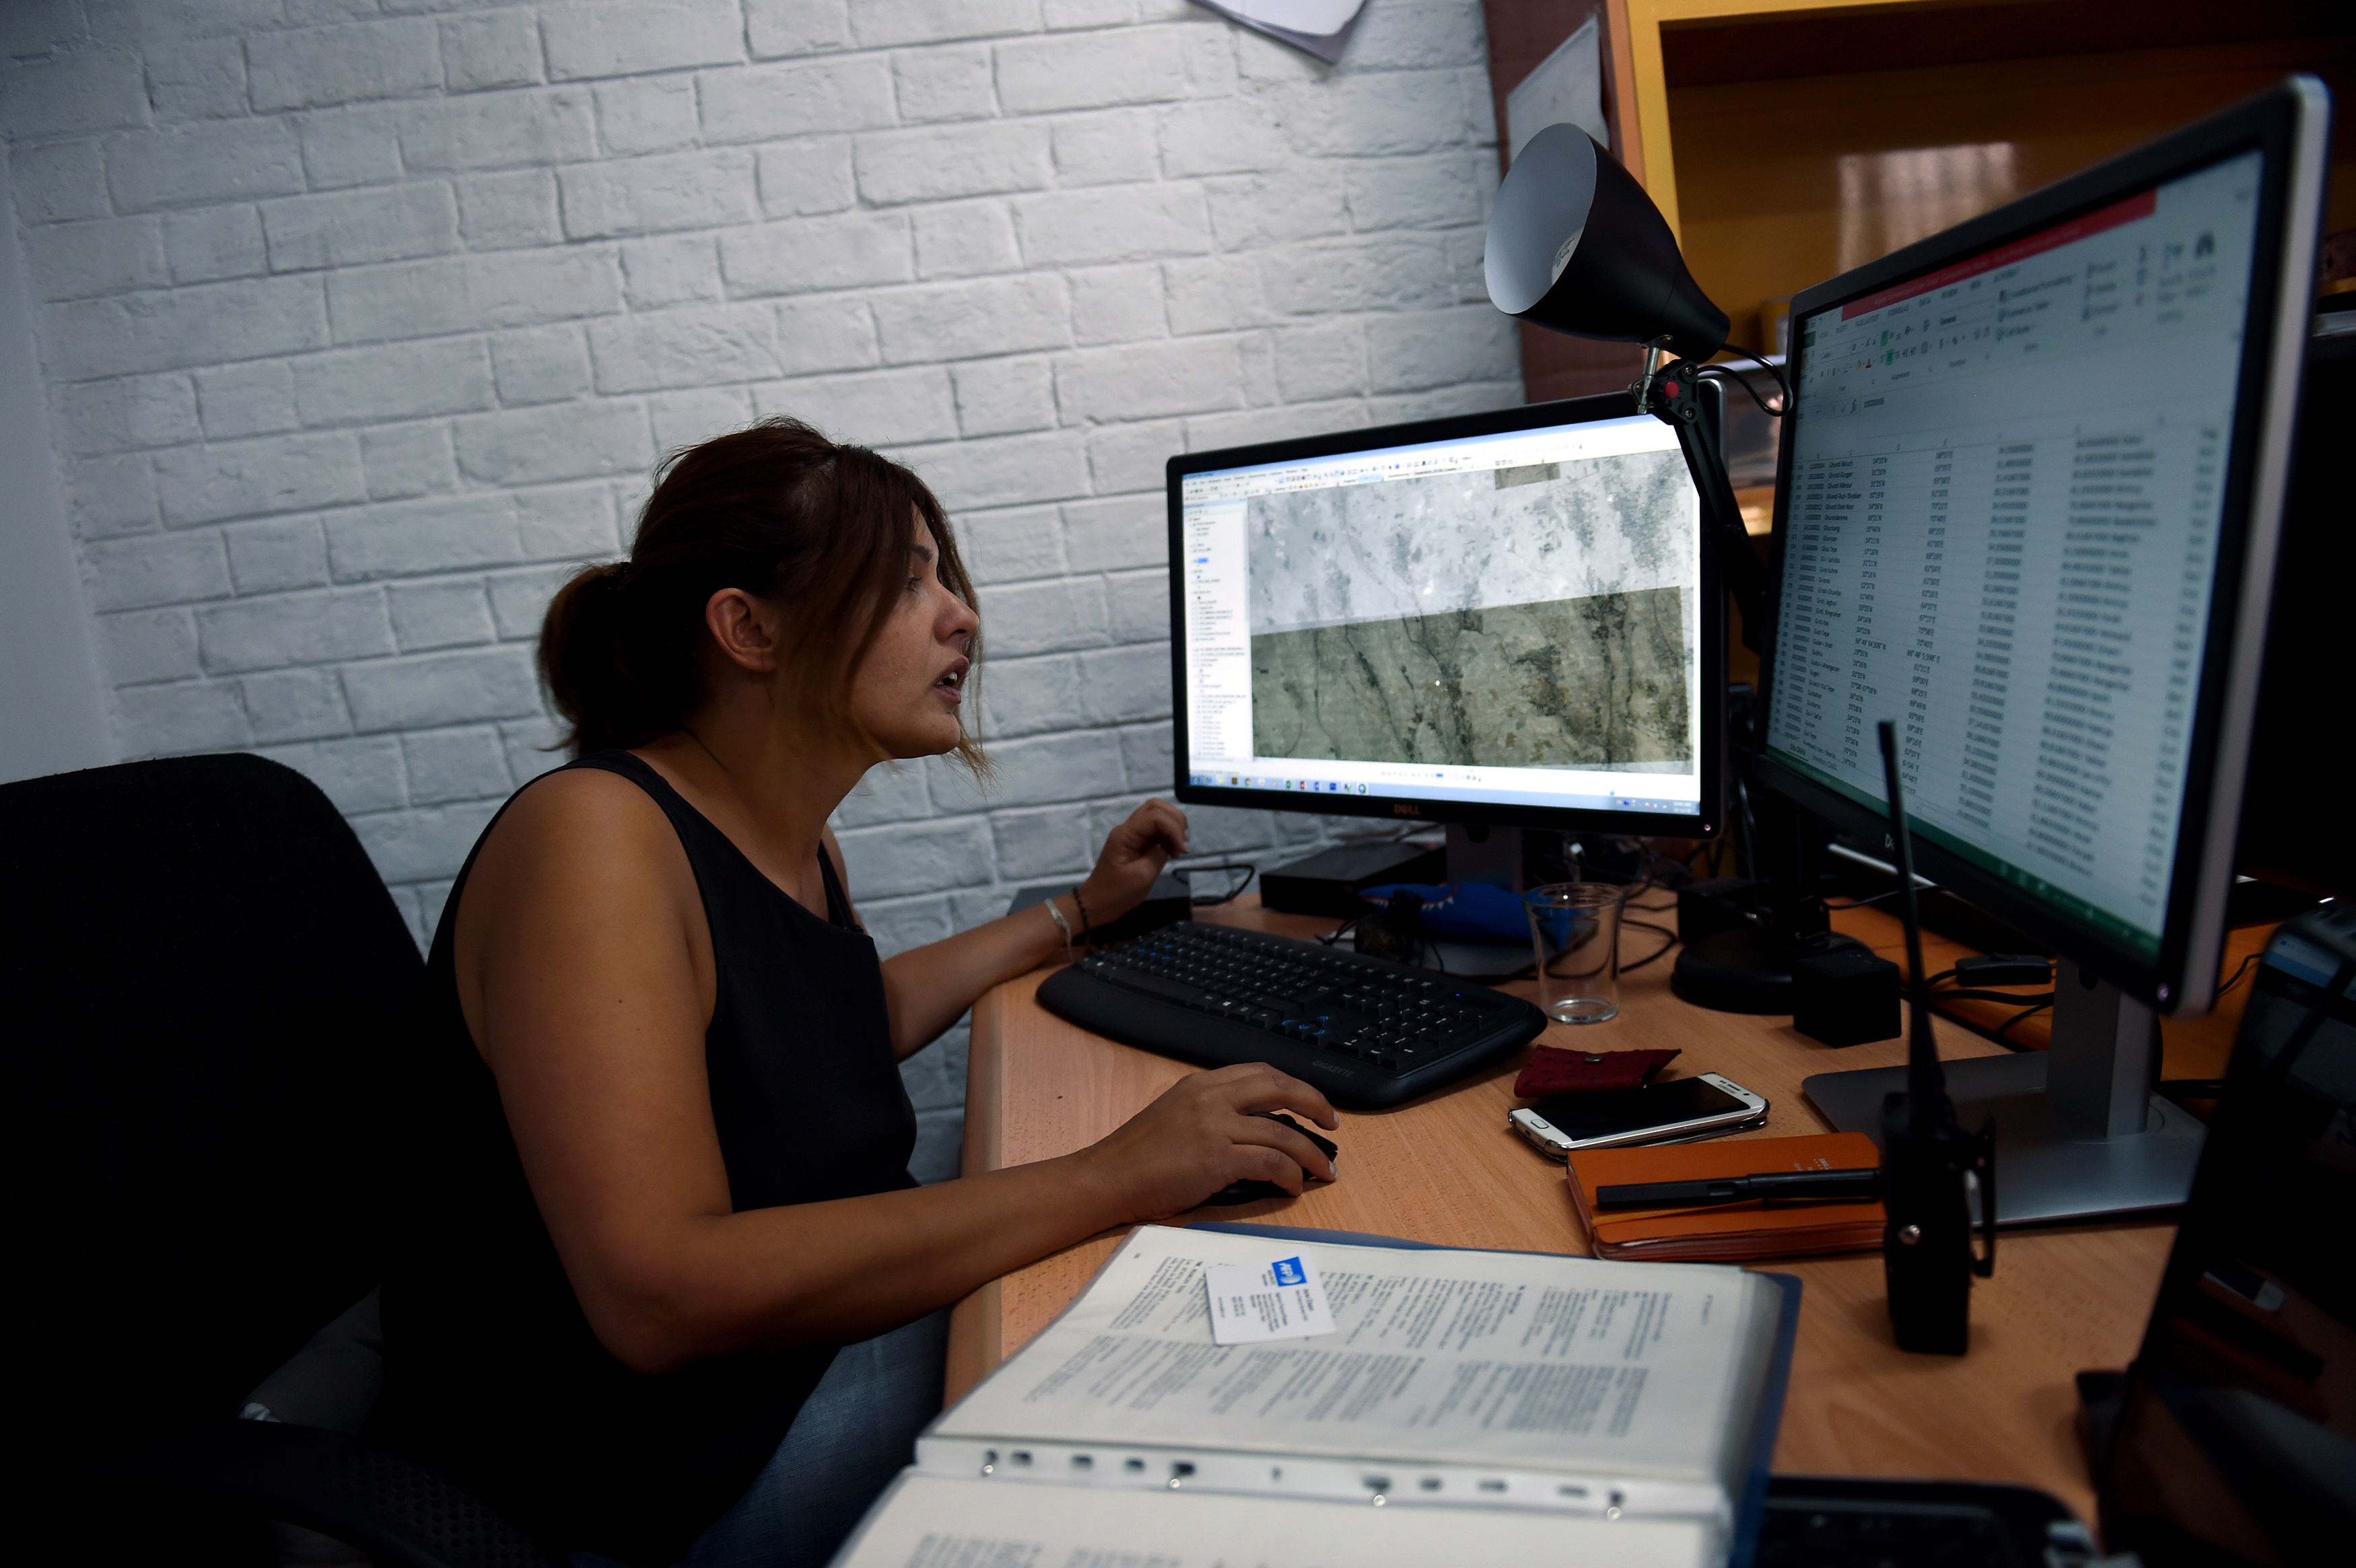 This photo taken on July 18, 2016 shows Elena Leoni, an Italian archaeology specialist on central Asia, looking at her workstation, as she works at the French Archaeological Delegation to Afghanistan (DAFA) office in Kabul. After 30 years of conflicts, Afghanistan's cultural heritage is in dire straits, but one group of archaeologists is trying to put the country's historical sites back on the map - literally. An international team is working to map the country's numerous sites and monuments with satellite imaging into a huge database -- a giant geographic information system (GIS).  / AFP PHOTO / WAKIL KOHSAR / TO GO WITH AFP STORY: Afghanistan-Culture-Archaeology-Heritage / Feature by Anne CHAON